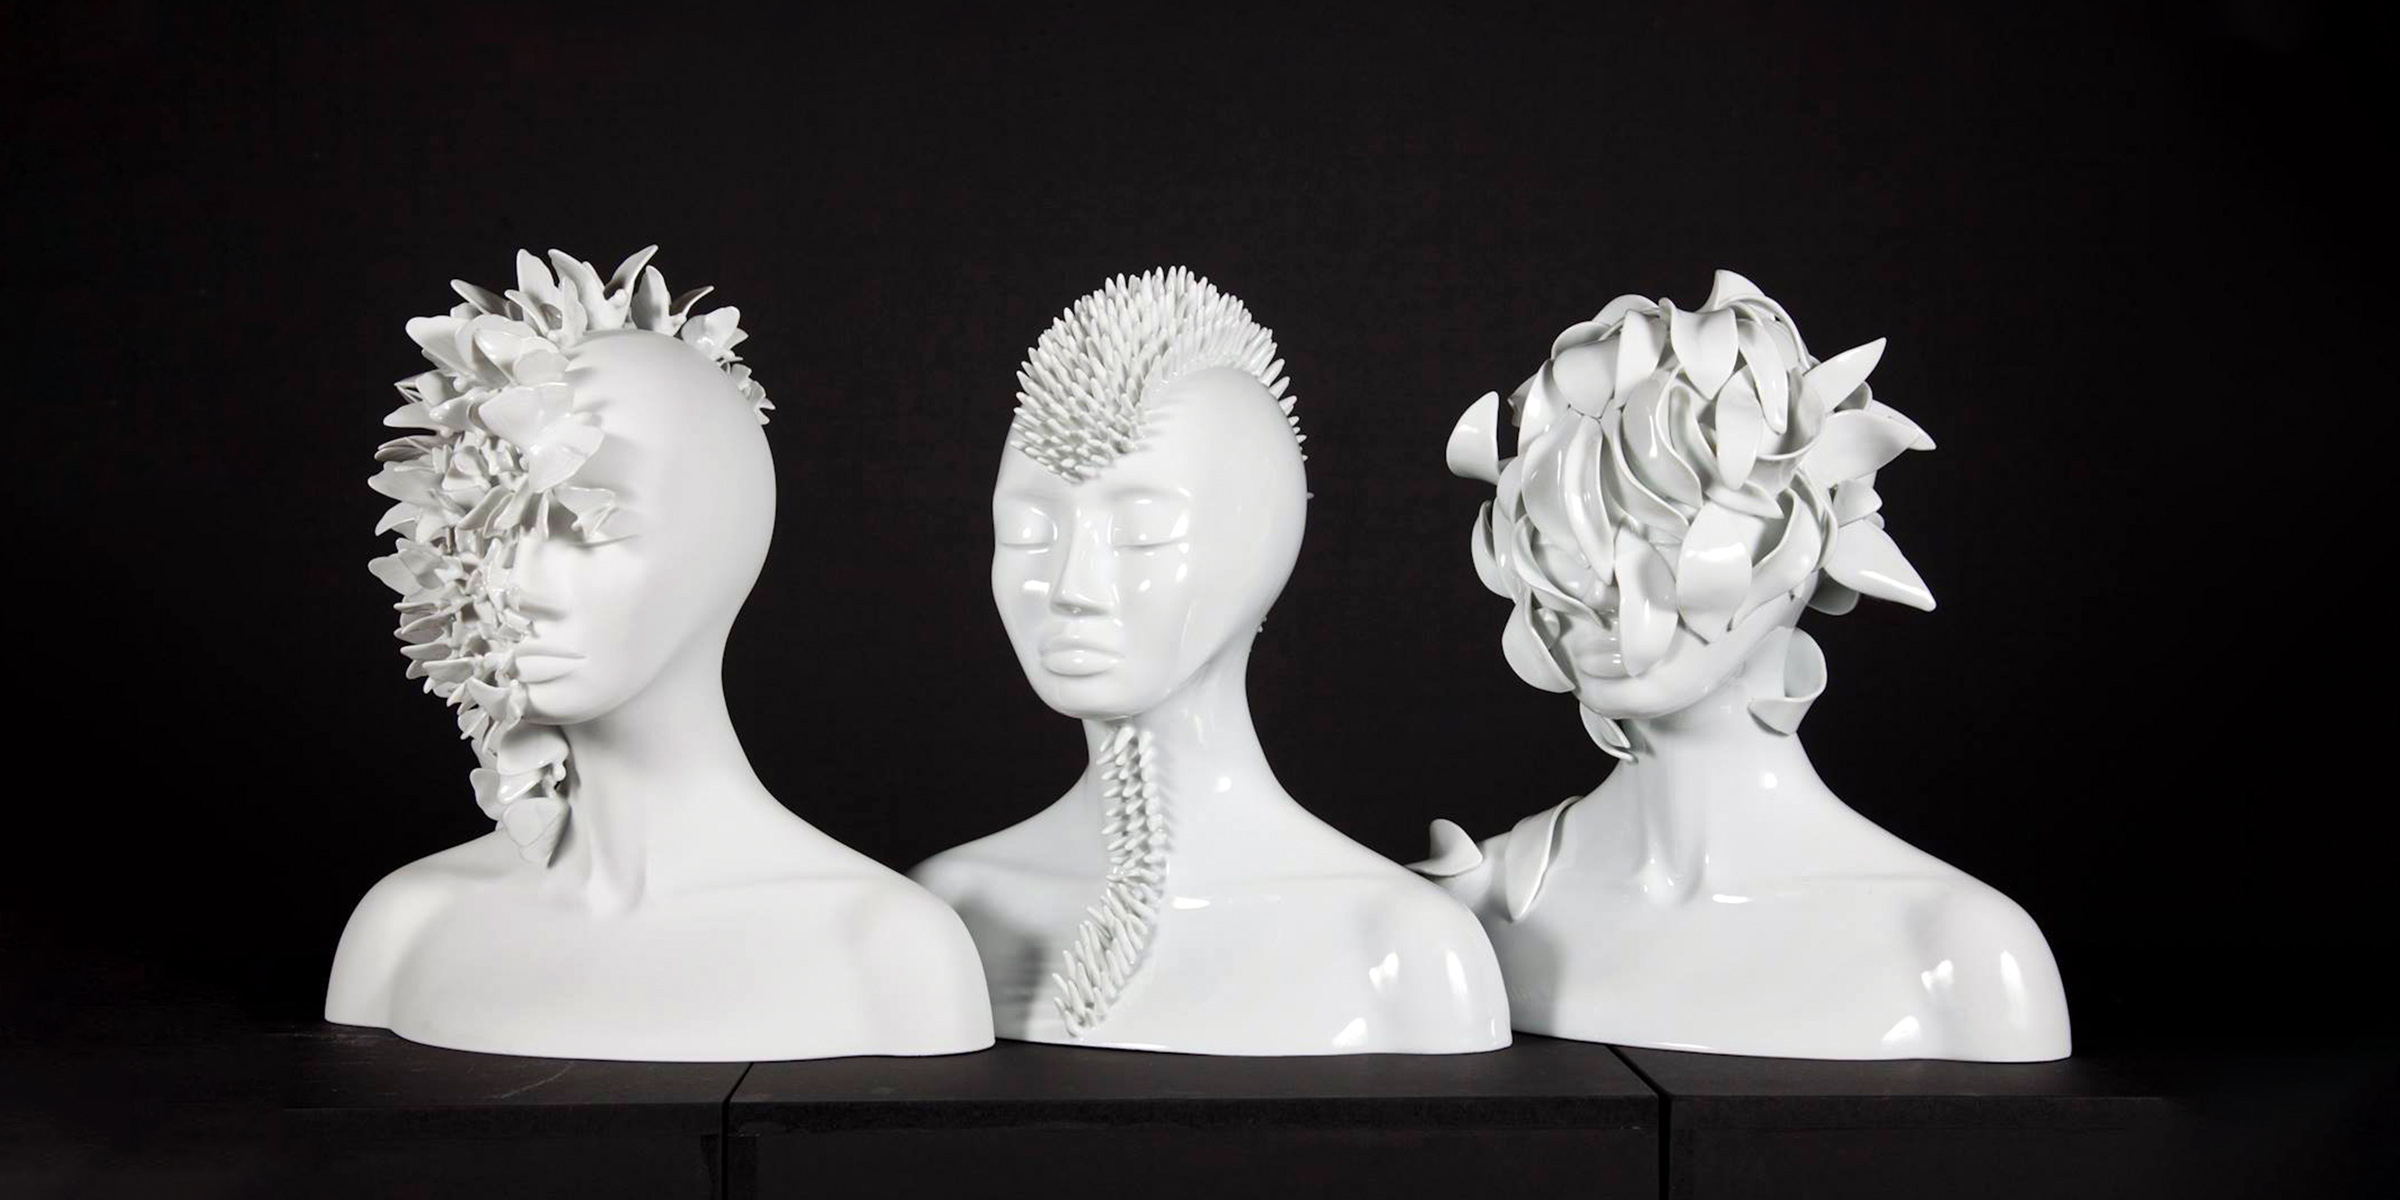 flower-faced-sculptures-that-shape-the-future-of-ceramics-featured